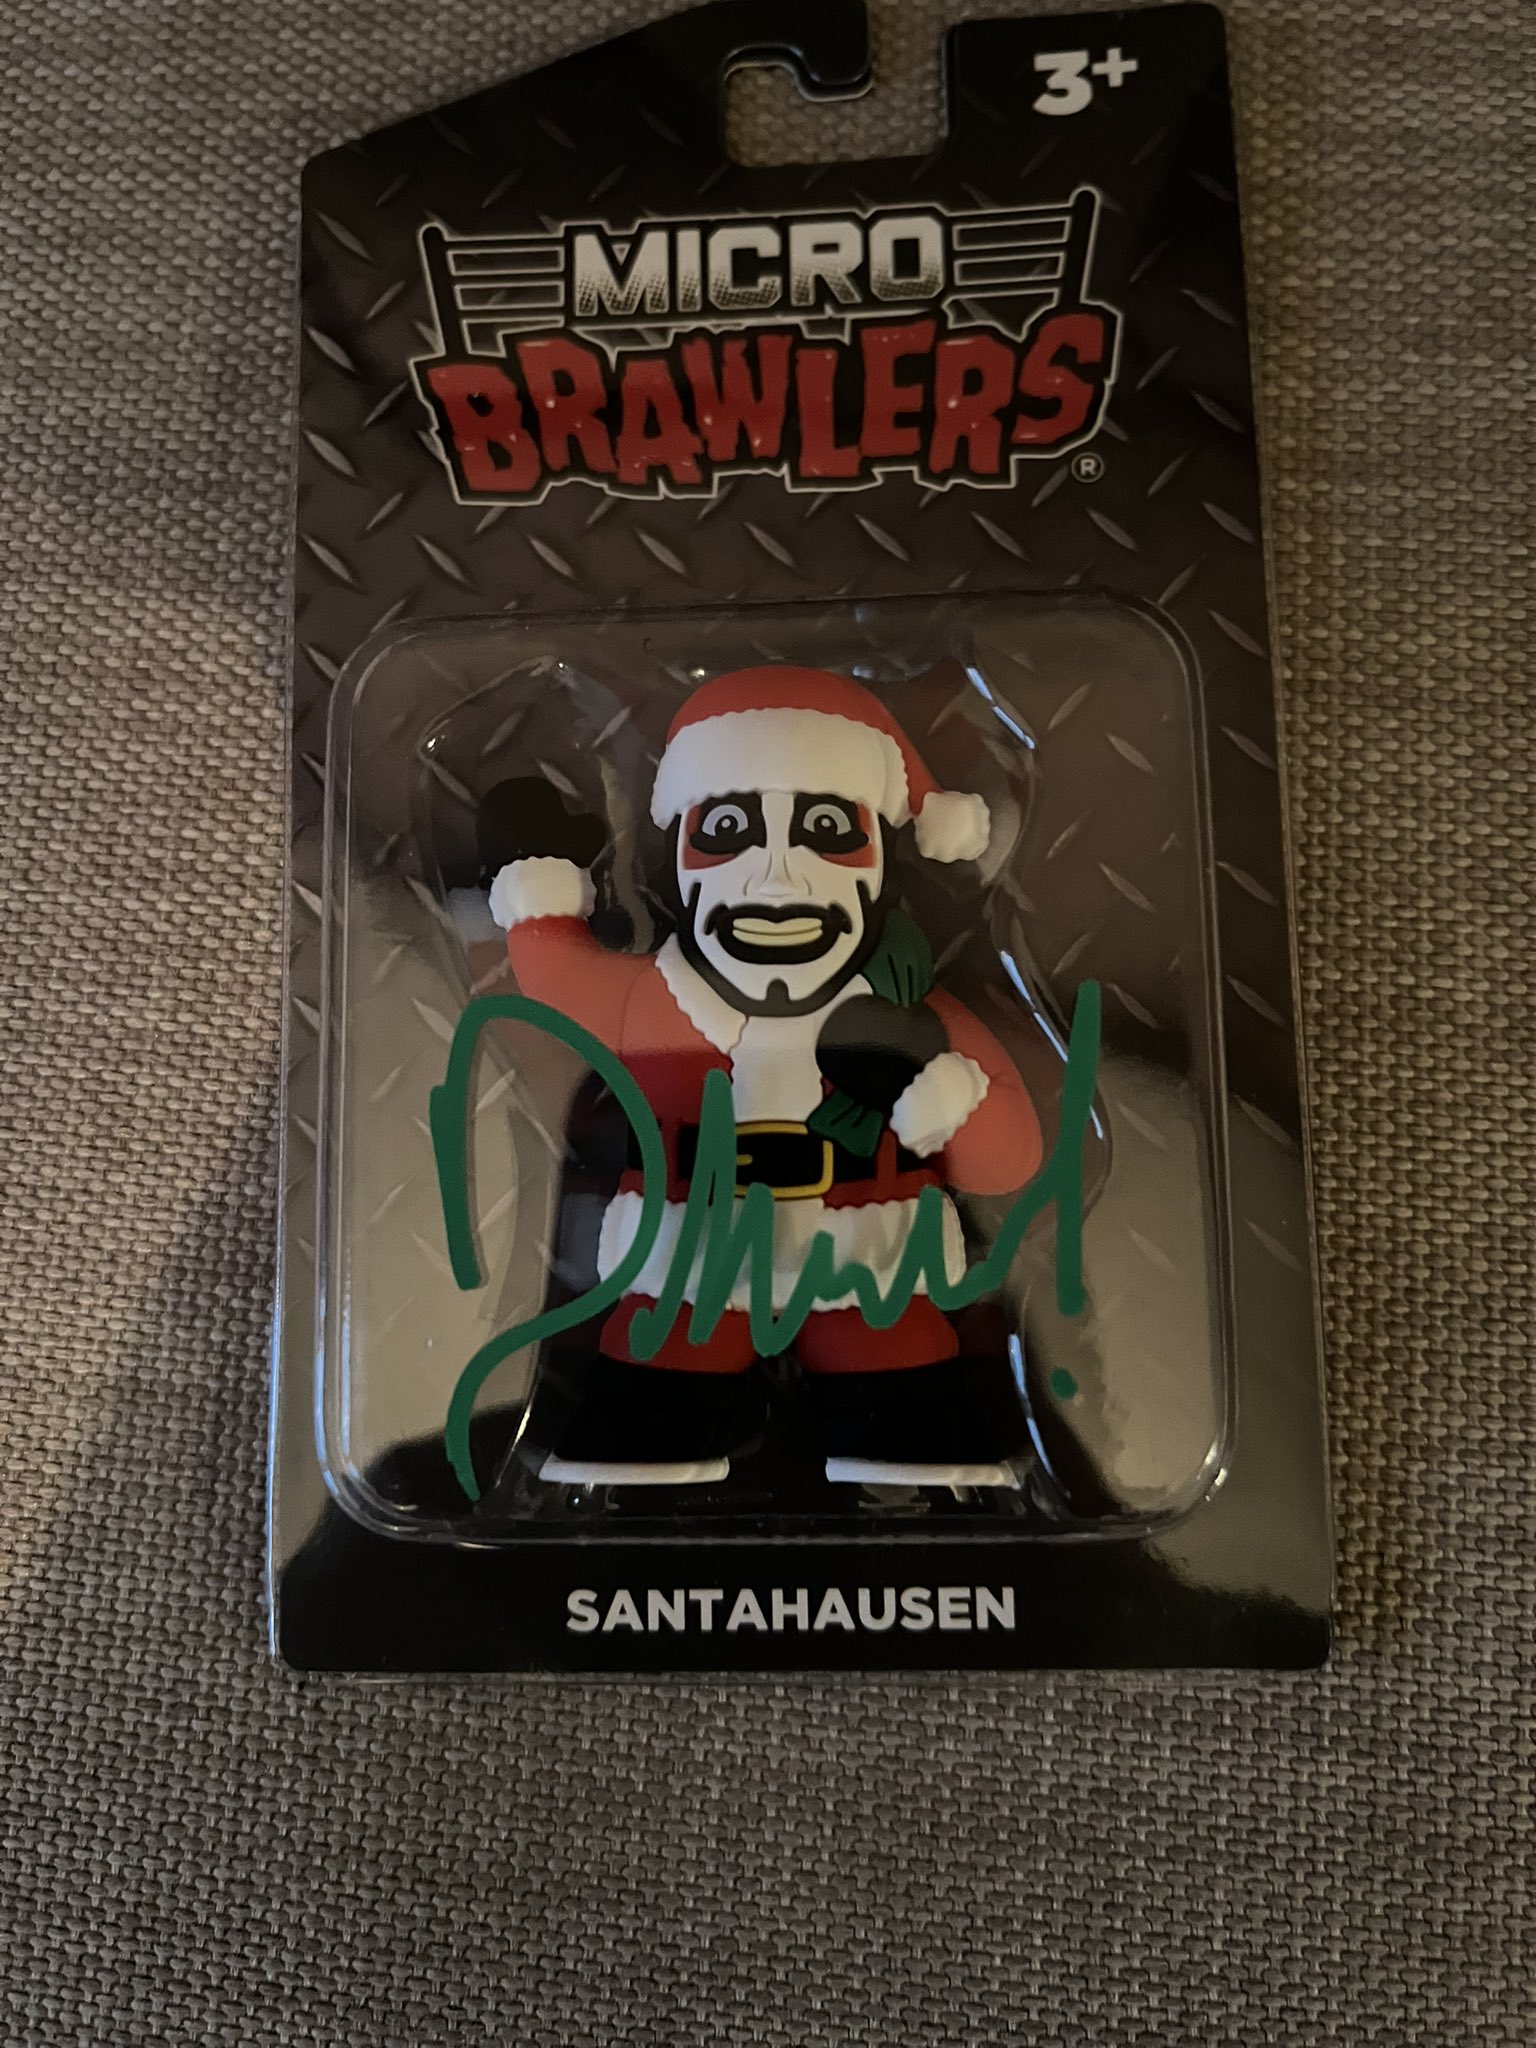 Danhausen on X: Bunch of buy it now items up, signed Santahausen  Microbrawlers and lots of other. Chase Danhausen's in auction.  @missloulou514 will be on, signing 7pm EST tonight join us or